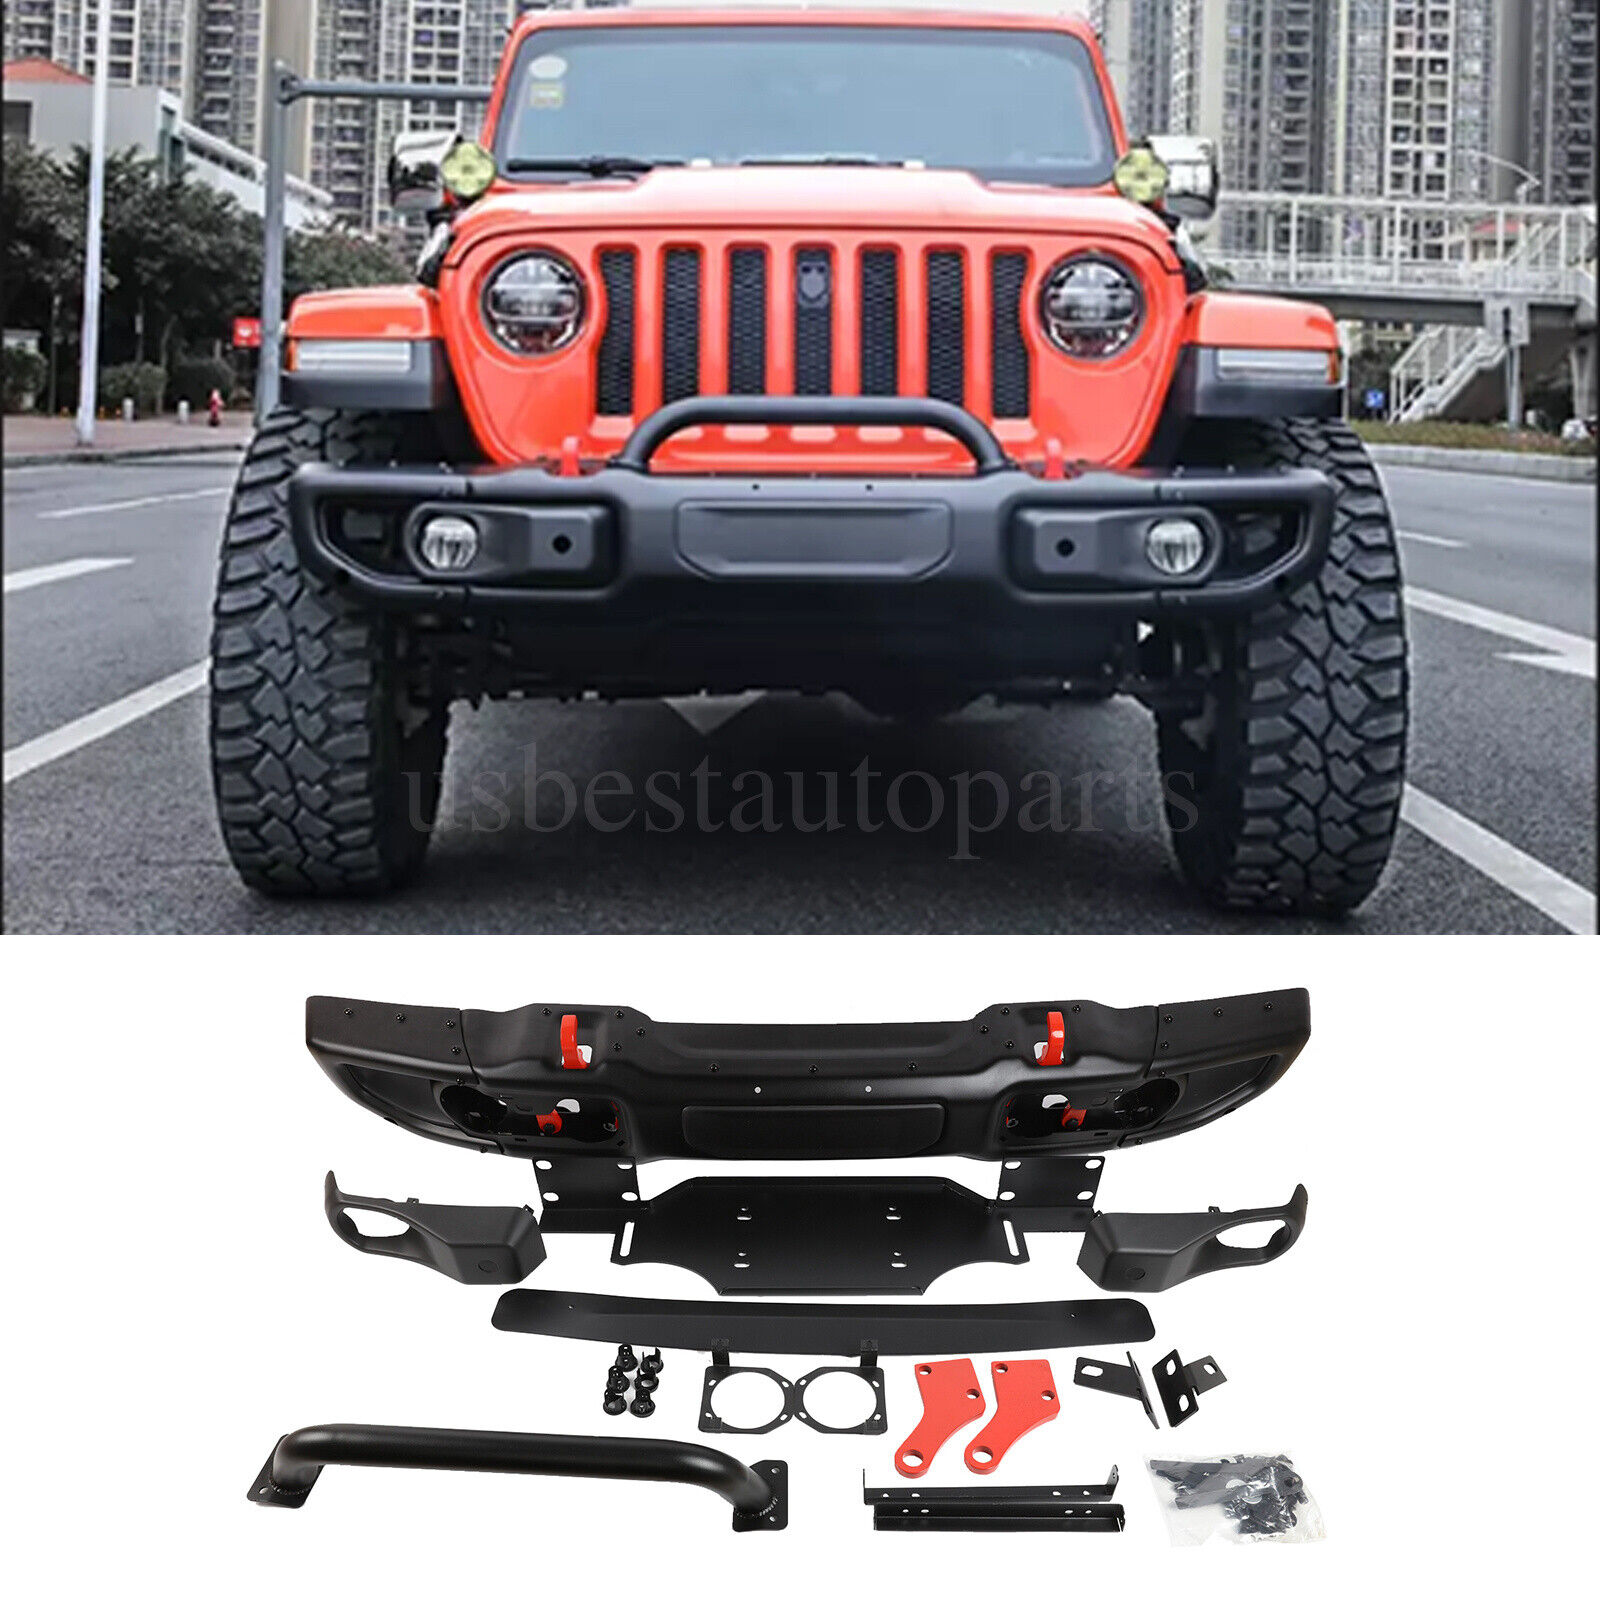 Steel Front Bumper Kit 10th Anniversary Style Fit For Jeep Wrangler JL Gladiator